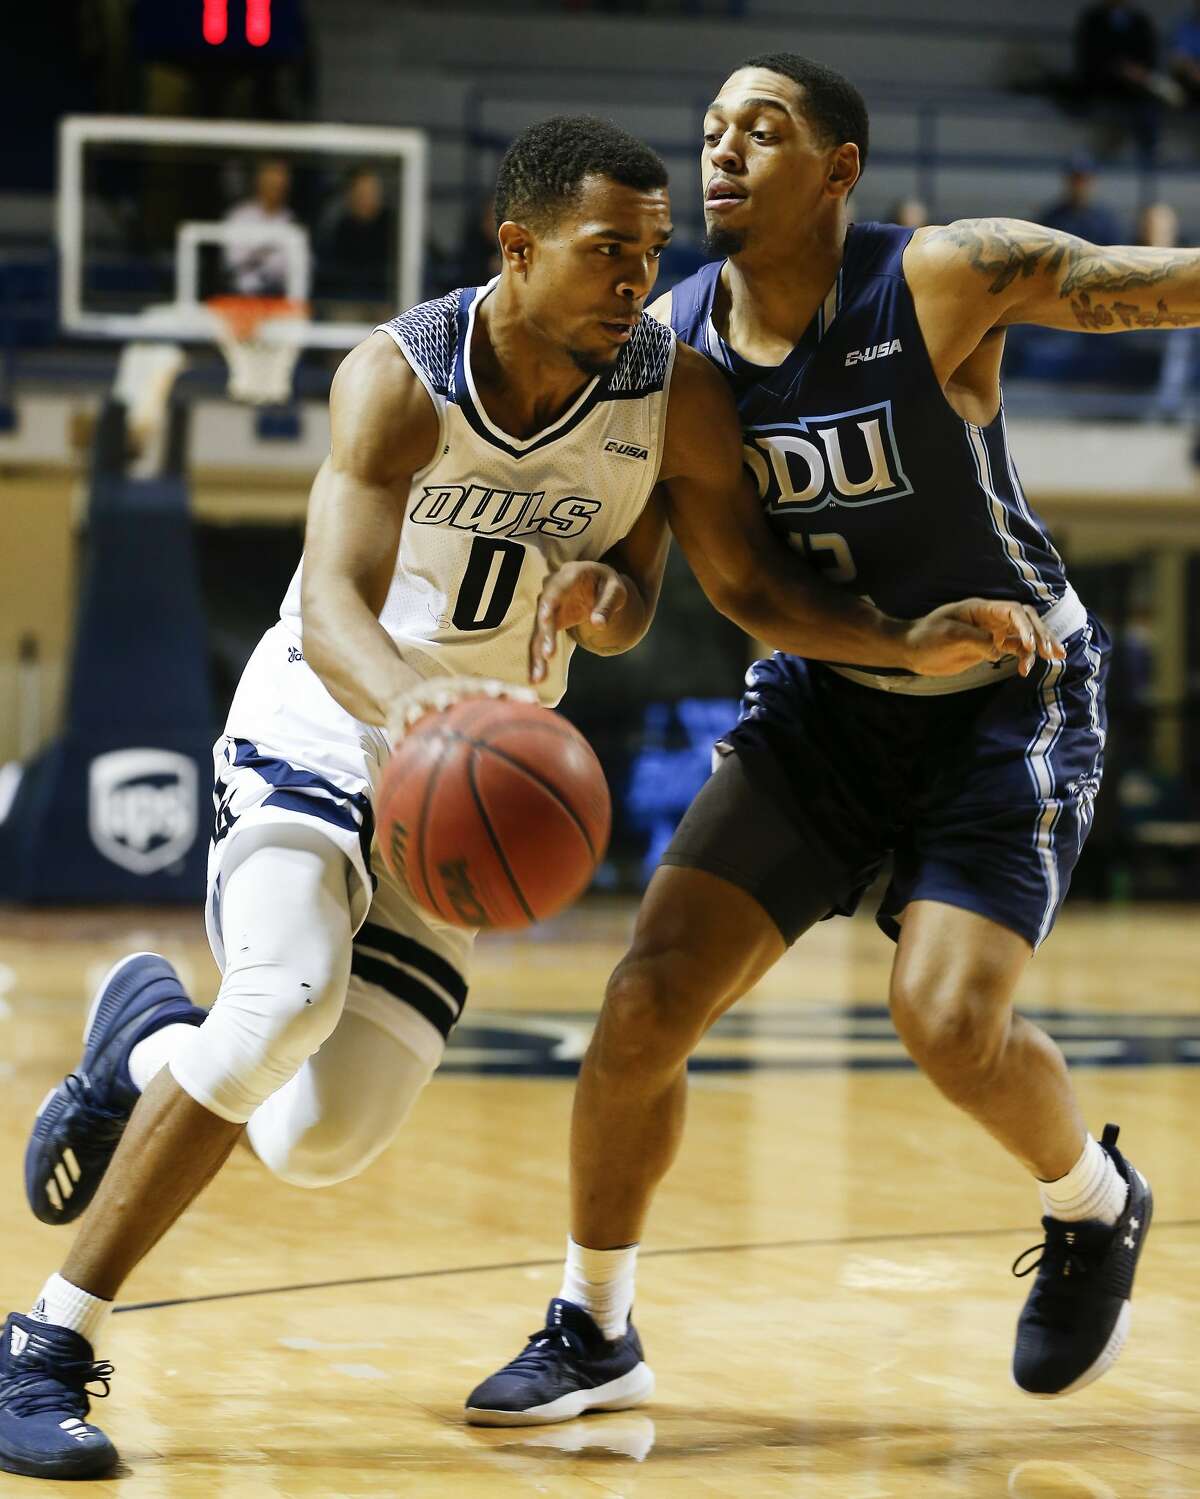 Rice guard Connor Cashaw drives around Old Dominion guard Randy Haynes Thursday, Jan. 4, 2018, in Houston. ( Steve Gonzales / Houston Chronicle )